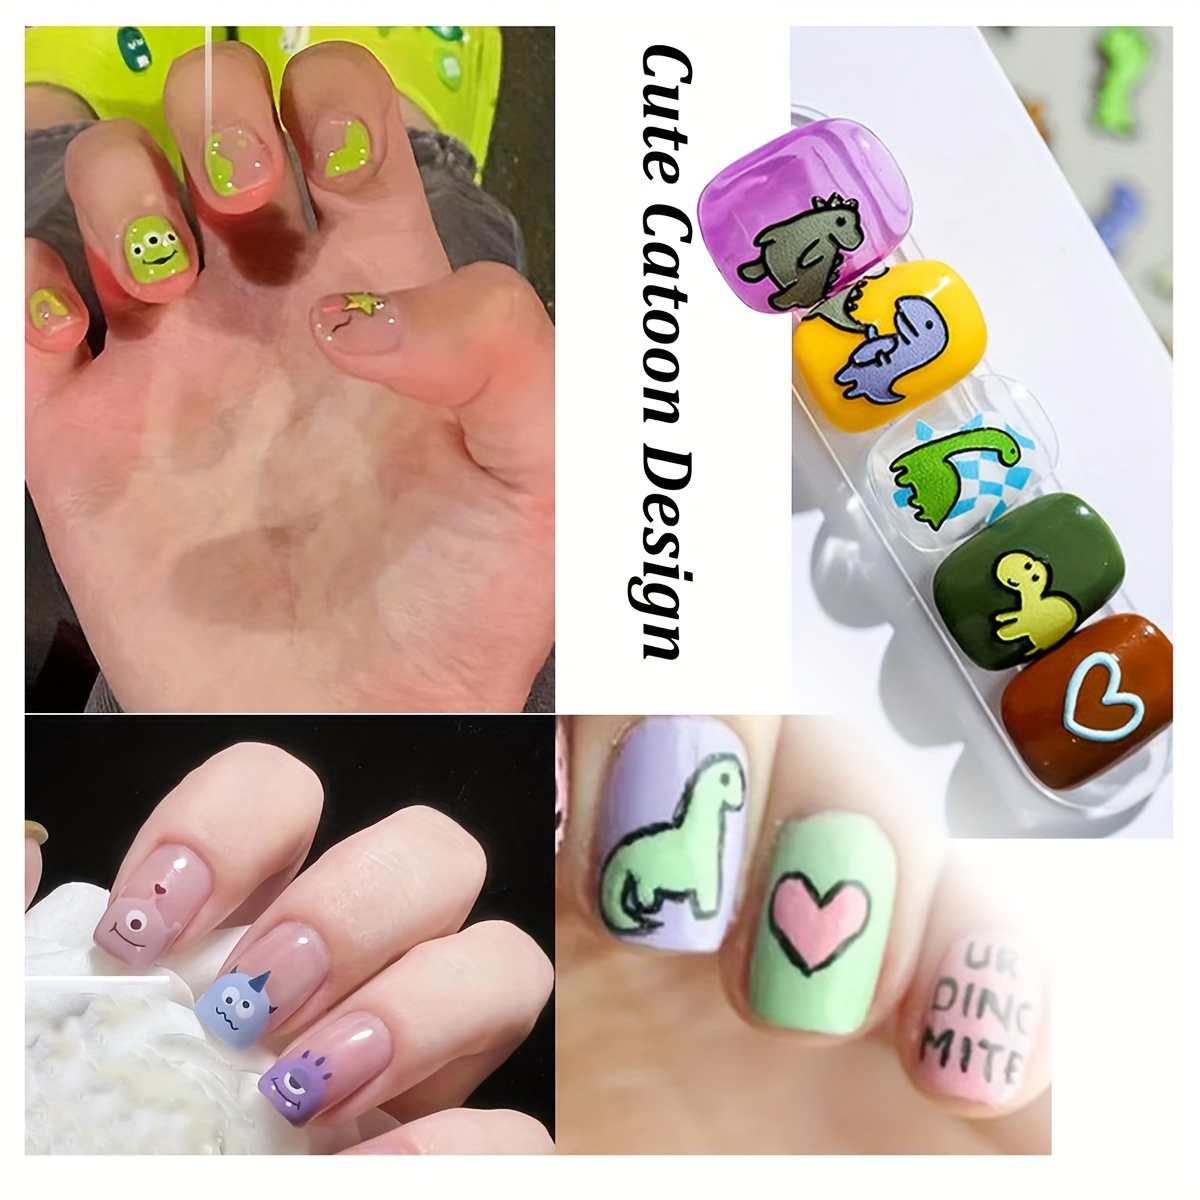 Fashion trend: Cartoon nails are rocking the casual look! - Times of India